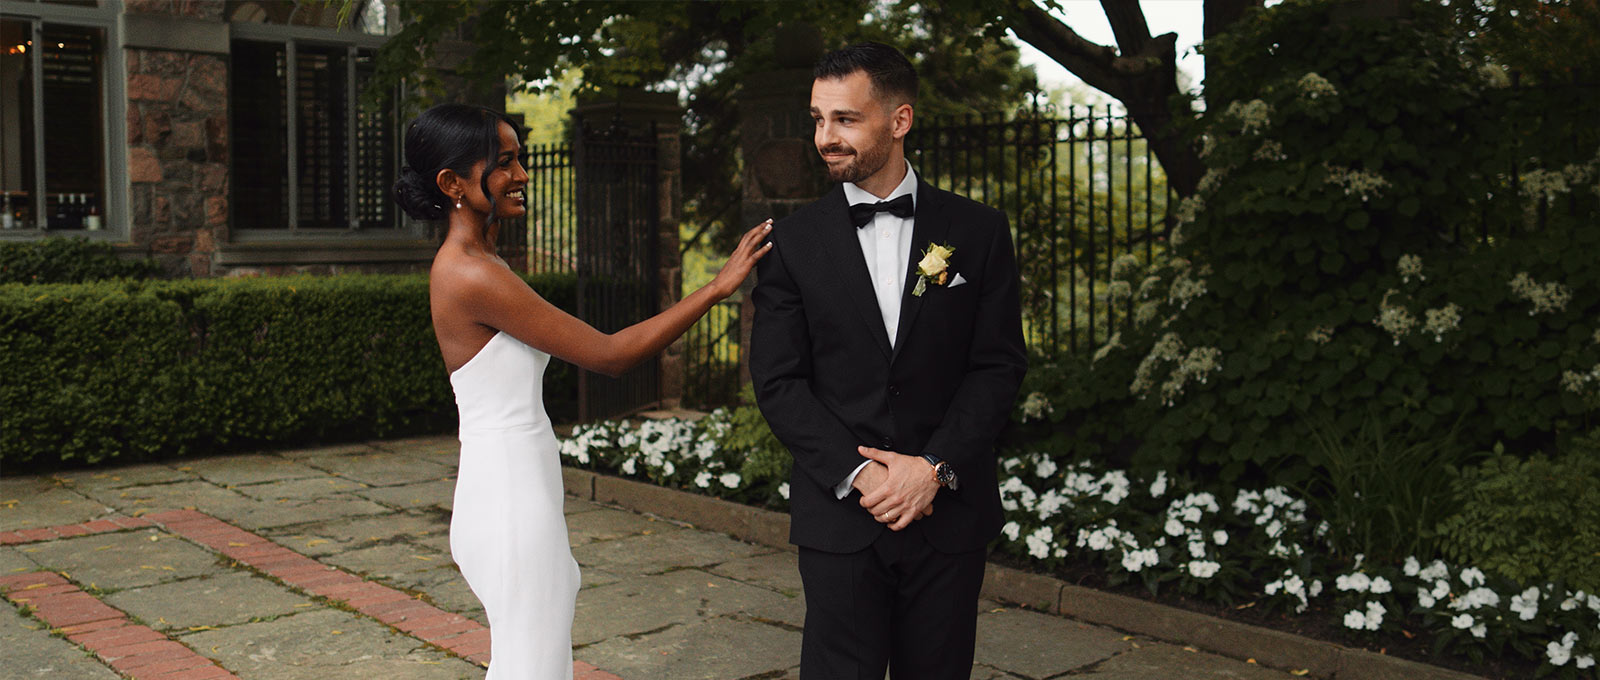 Bride and groom share a first look in Graydon Hall's front courtyard at dusk.